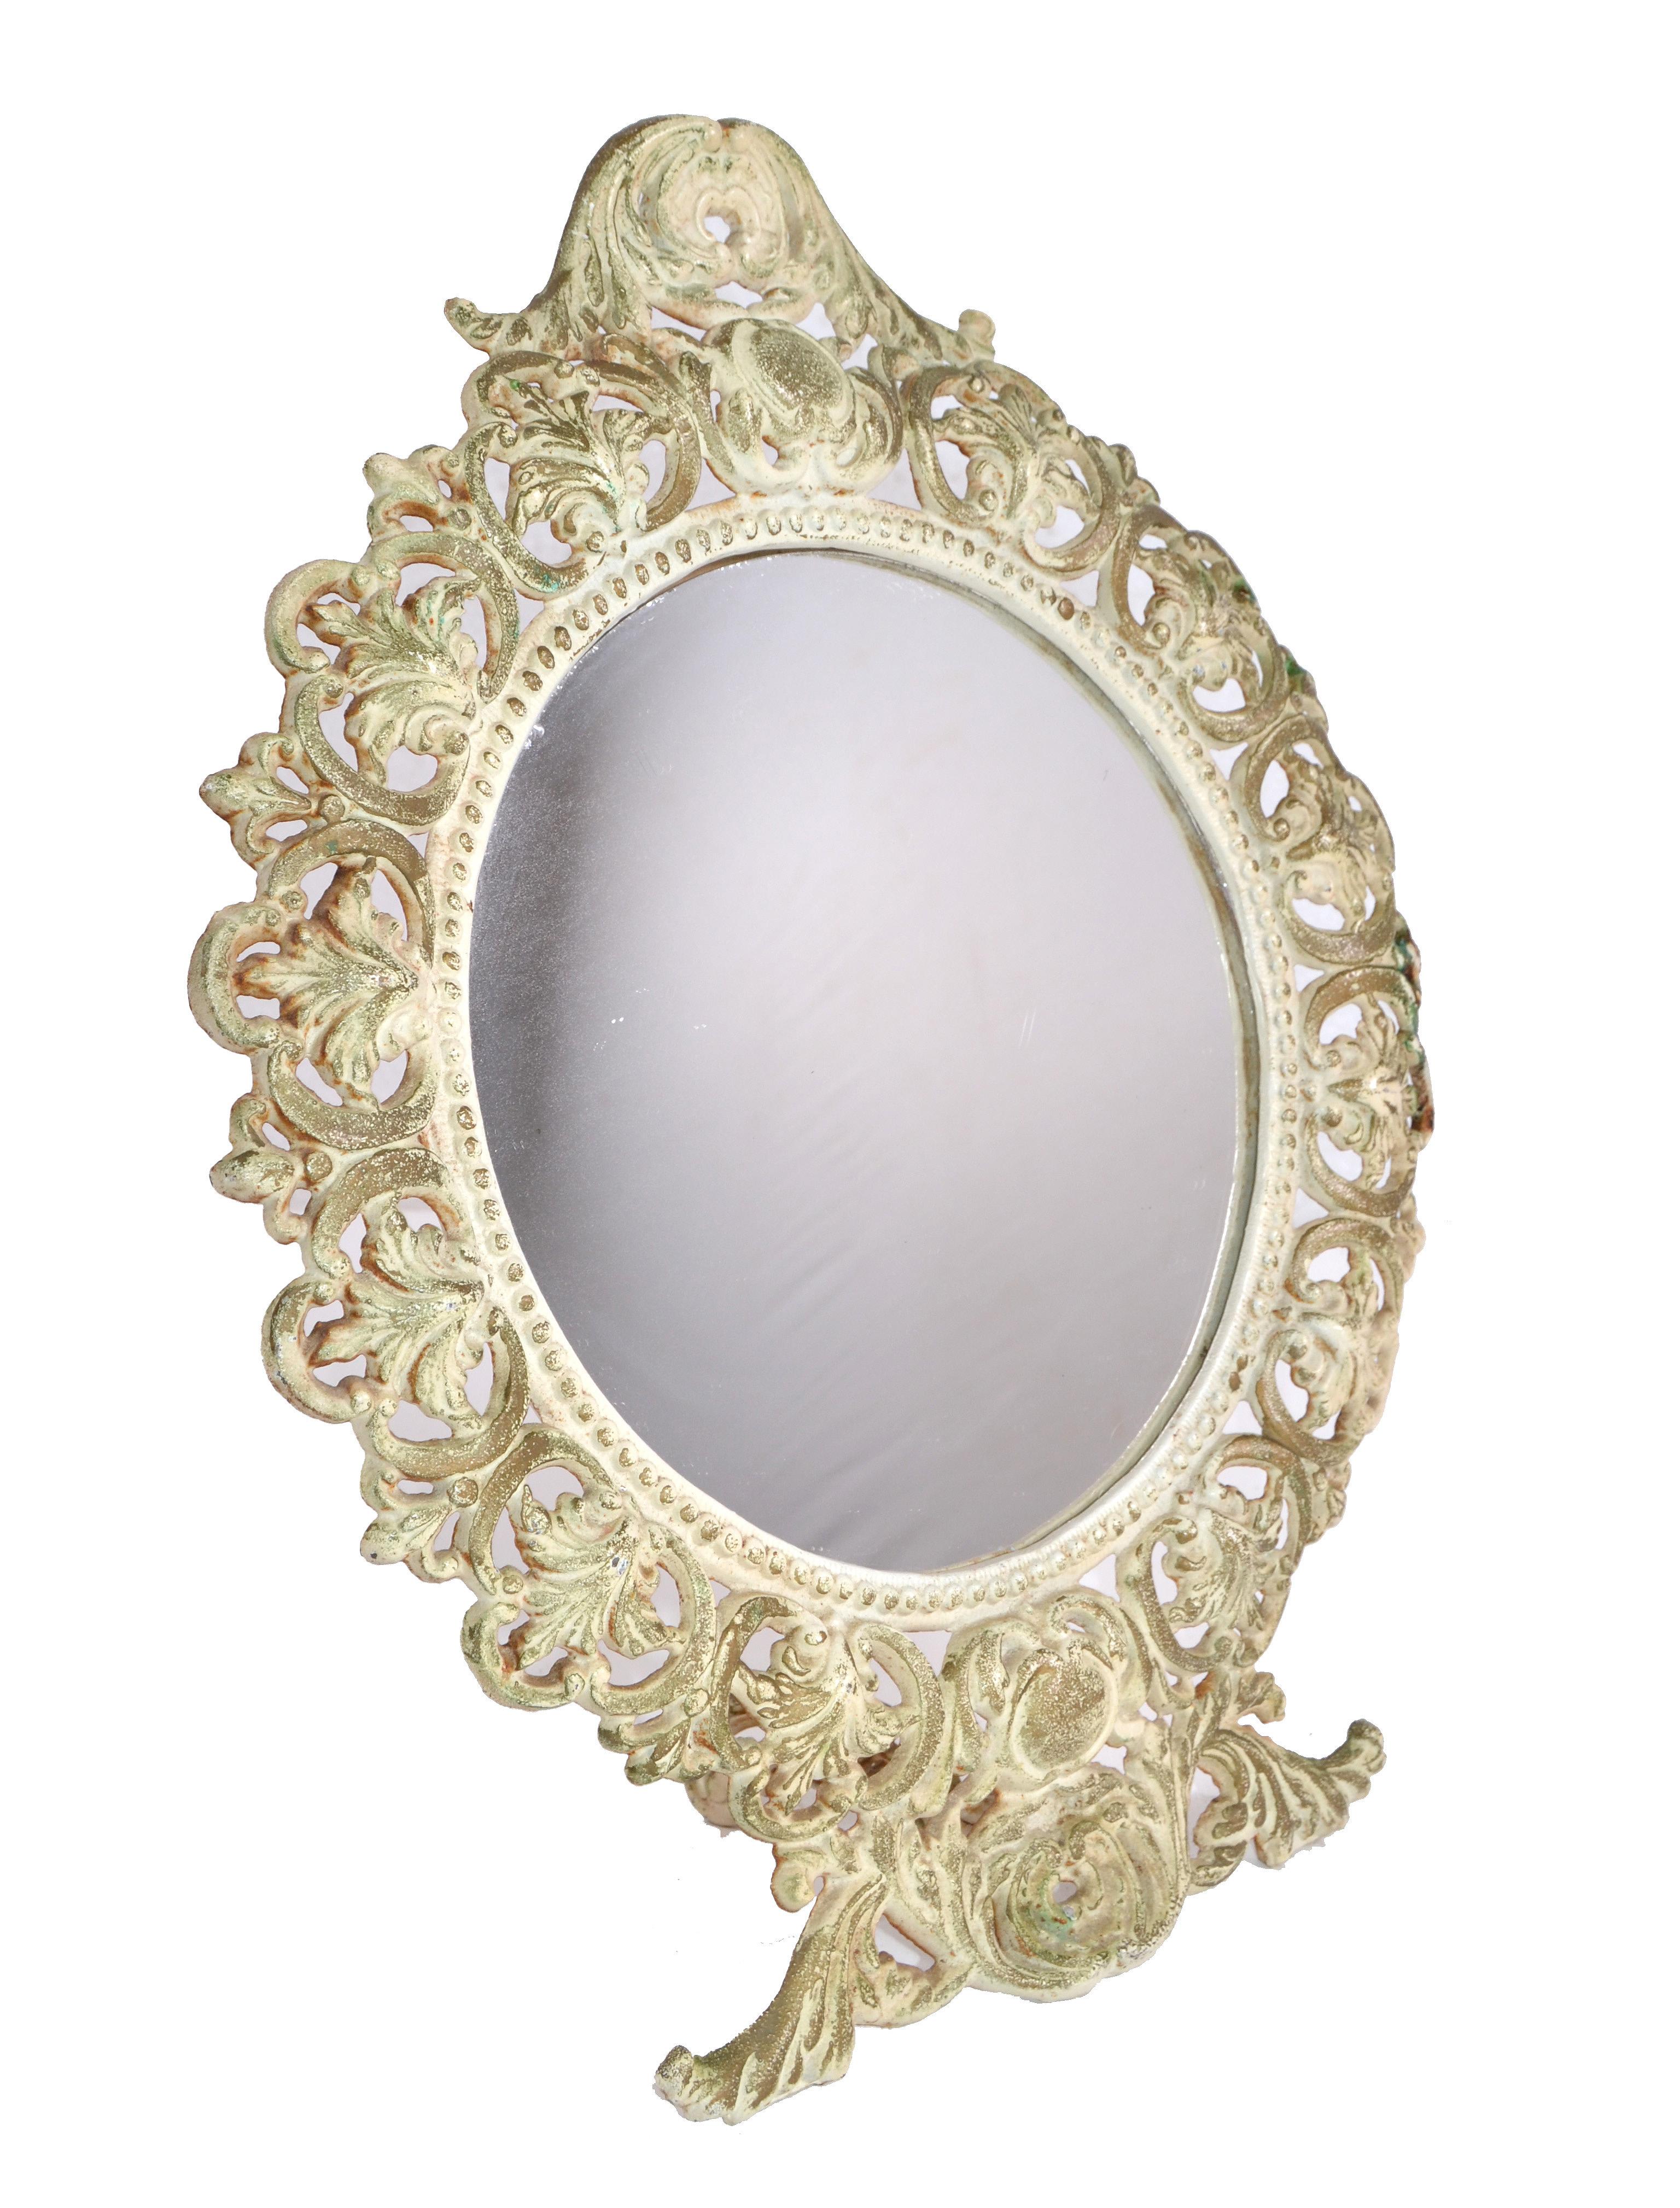 Lovely Art Nouveau cast iron vanity mirror or table mirror.
Very decorative with hearts and flower motives.
The backing is made out of wood.
We left it in the distressed original finish.